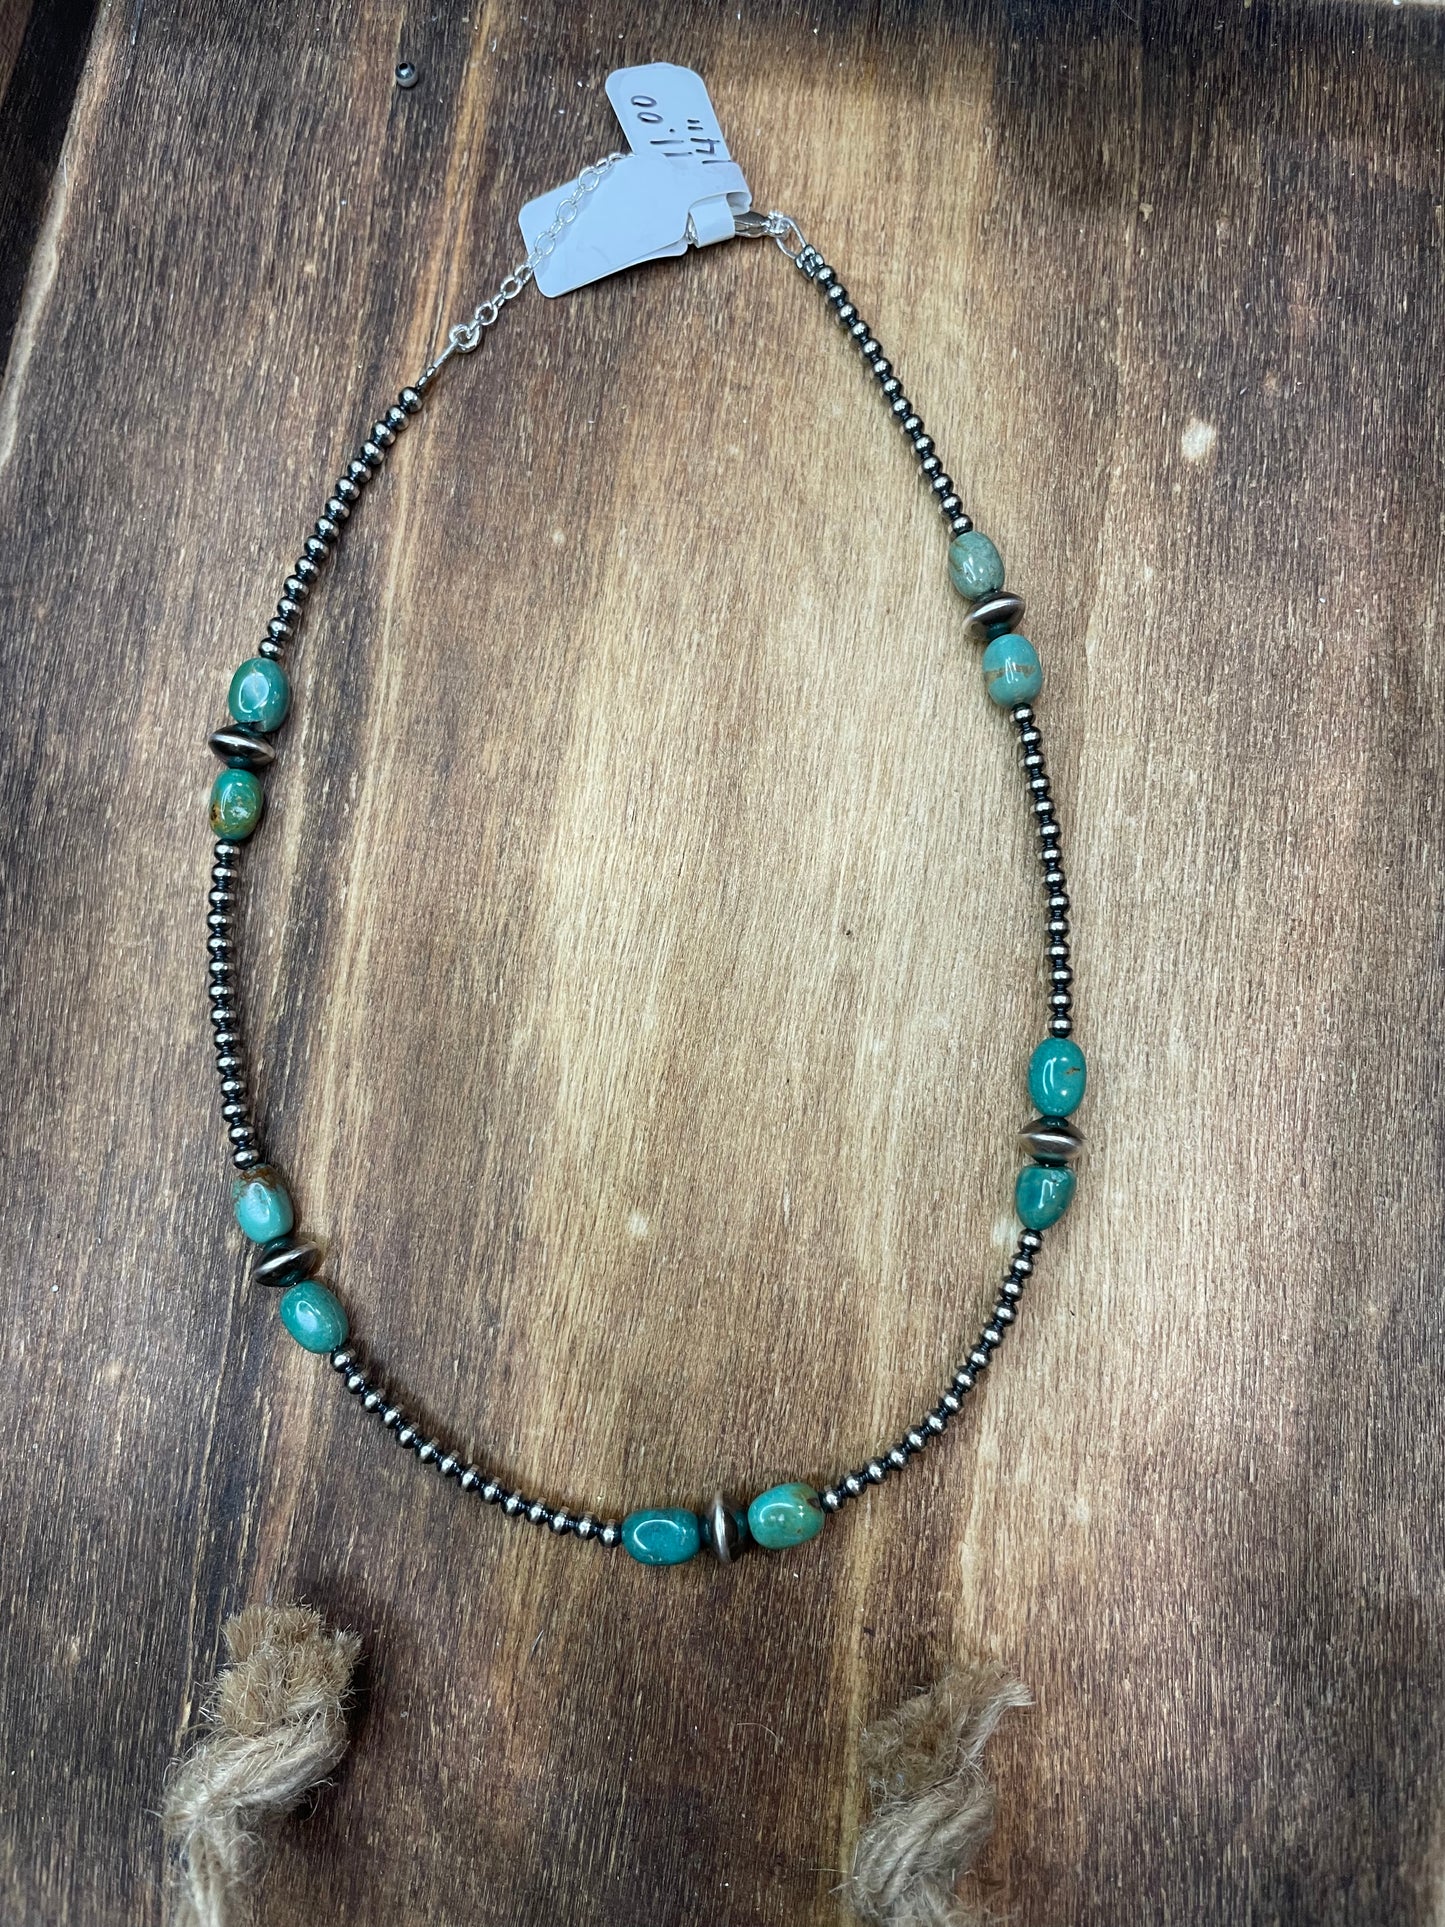 3mm Navajo pearl Necklace with Sonoran Turquoise 6mm saucer